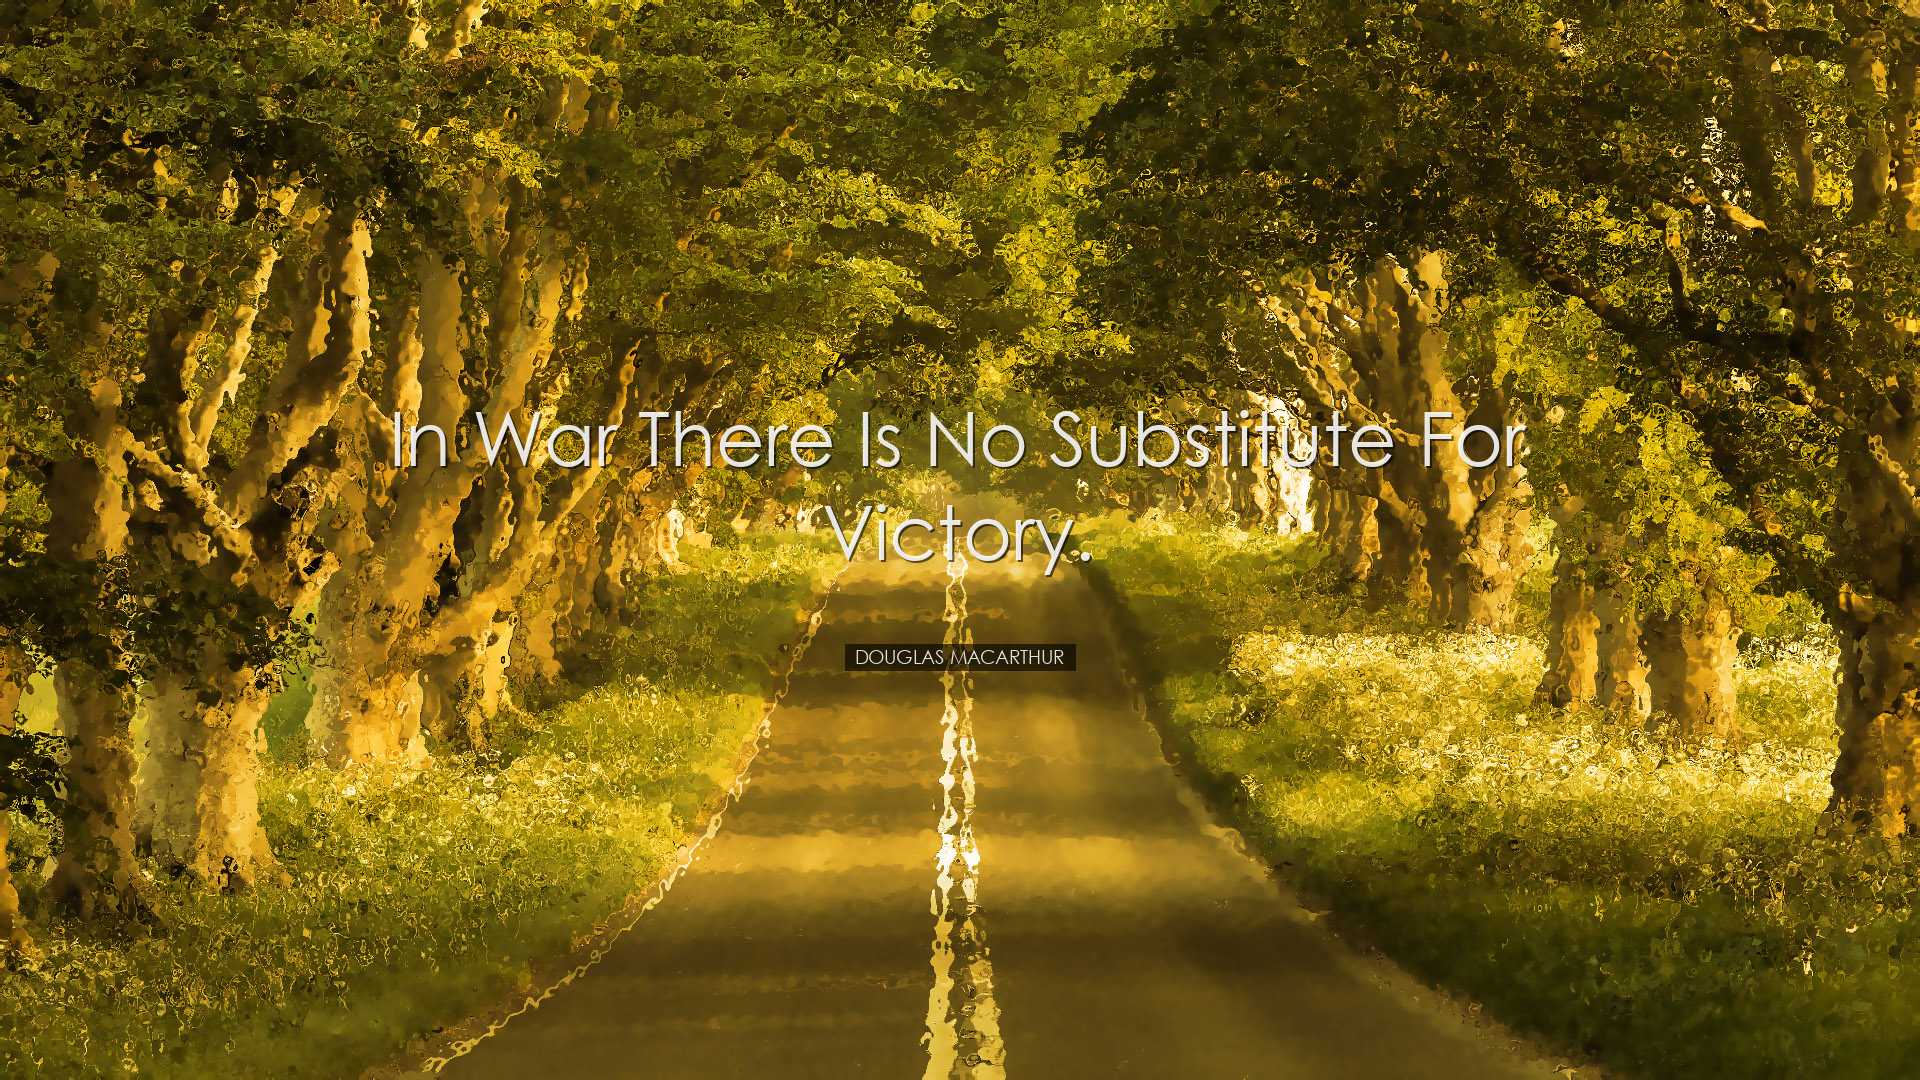 In war there is no substitute for victory. - Douglas MacArthur